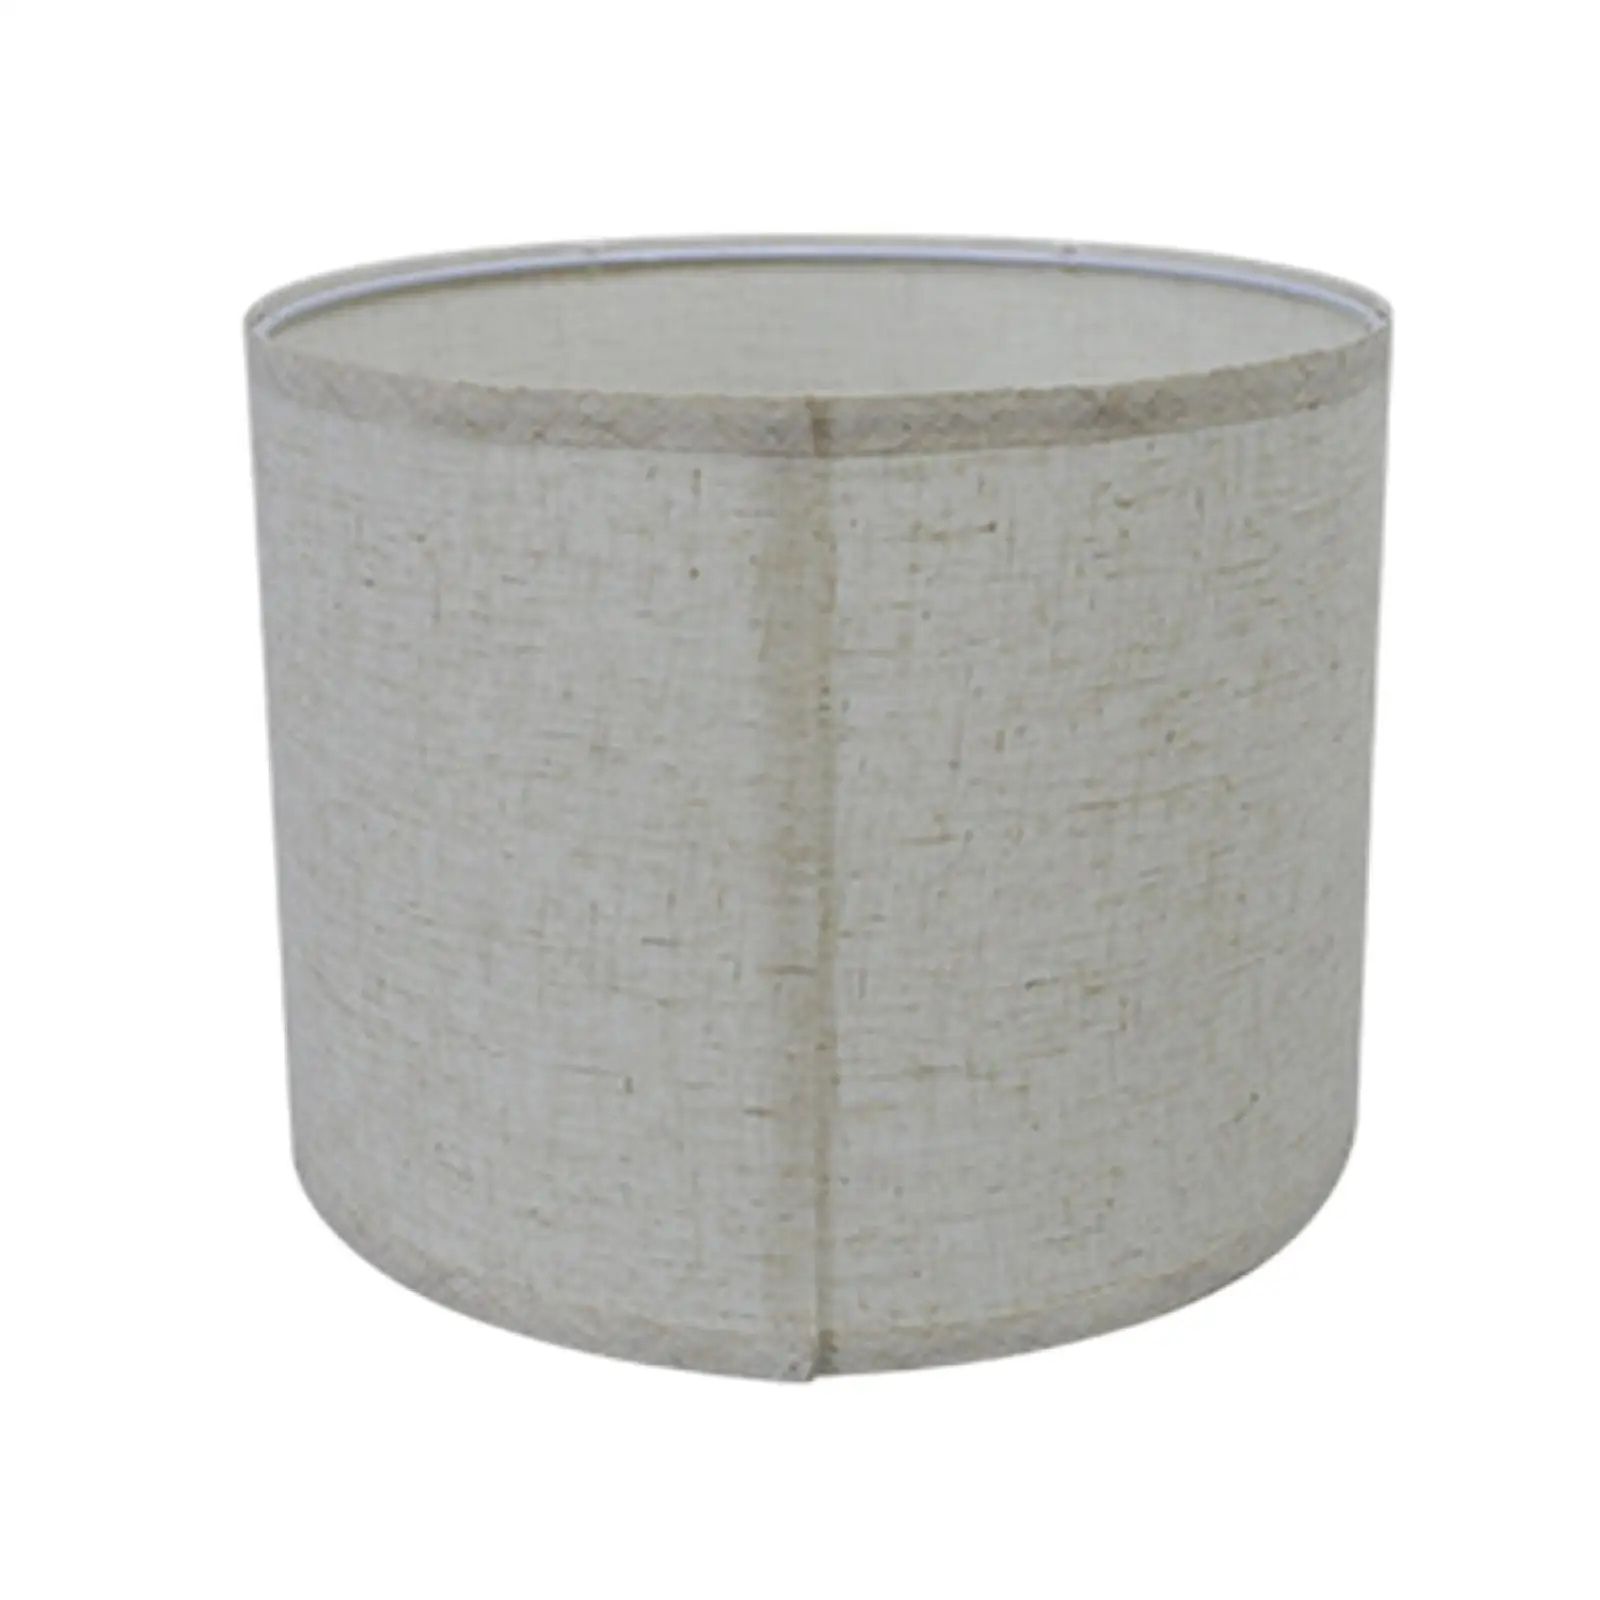 Drum Lamp Shade  Decoration Barrel Lampshade for Bedside Lamp